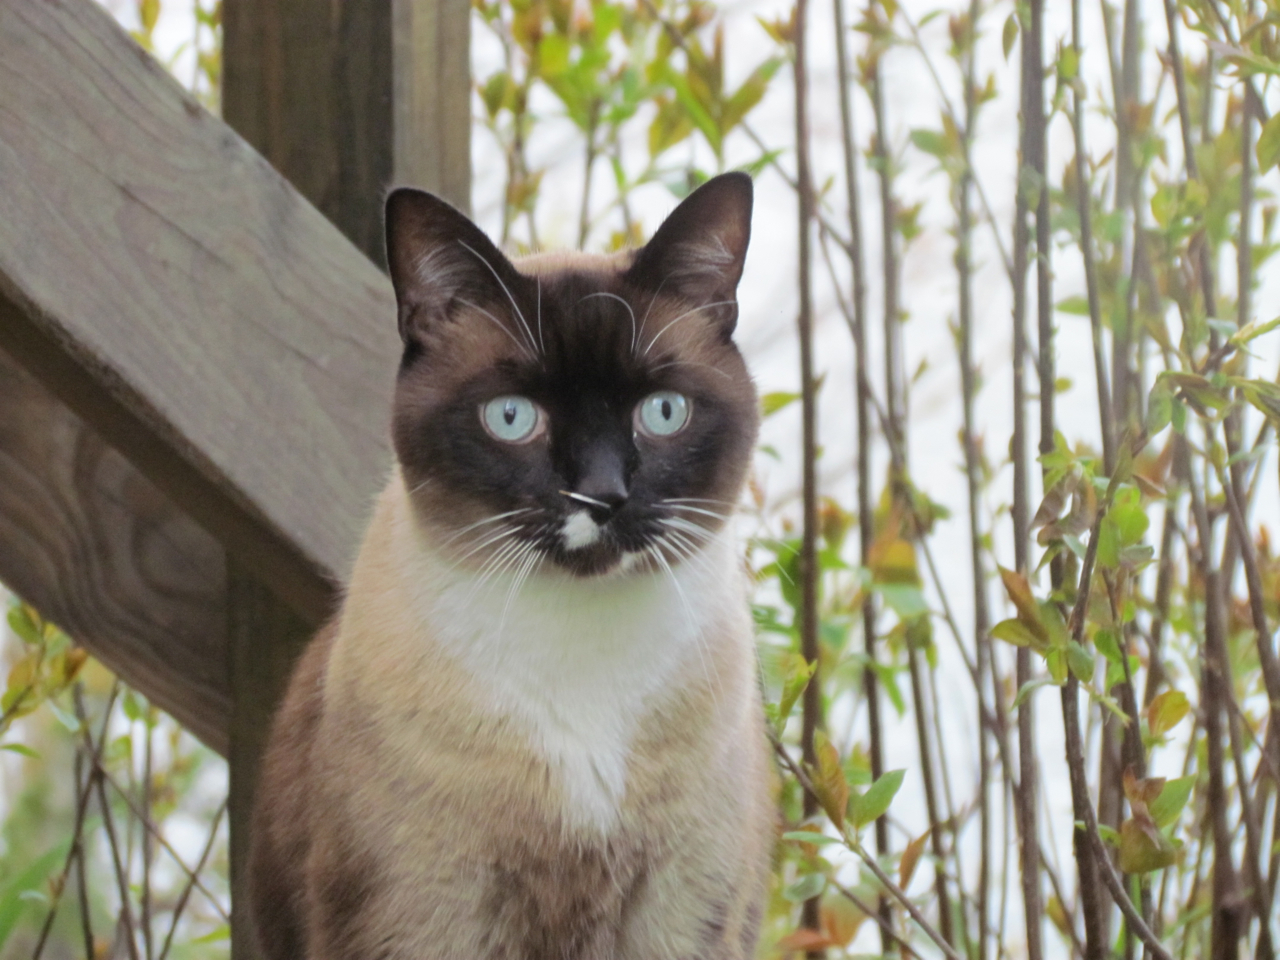 Scuppa, Snowshoe Siamese  (user submitted)